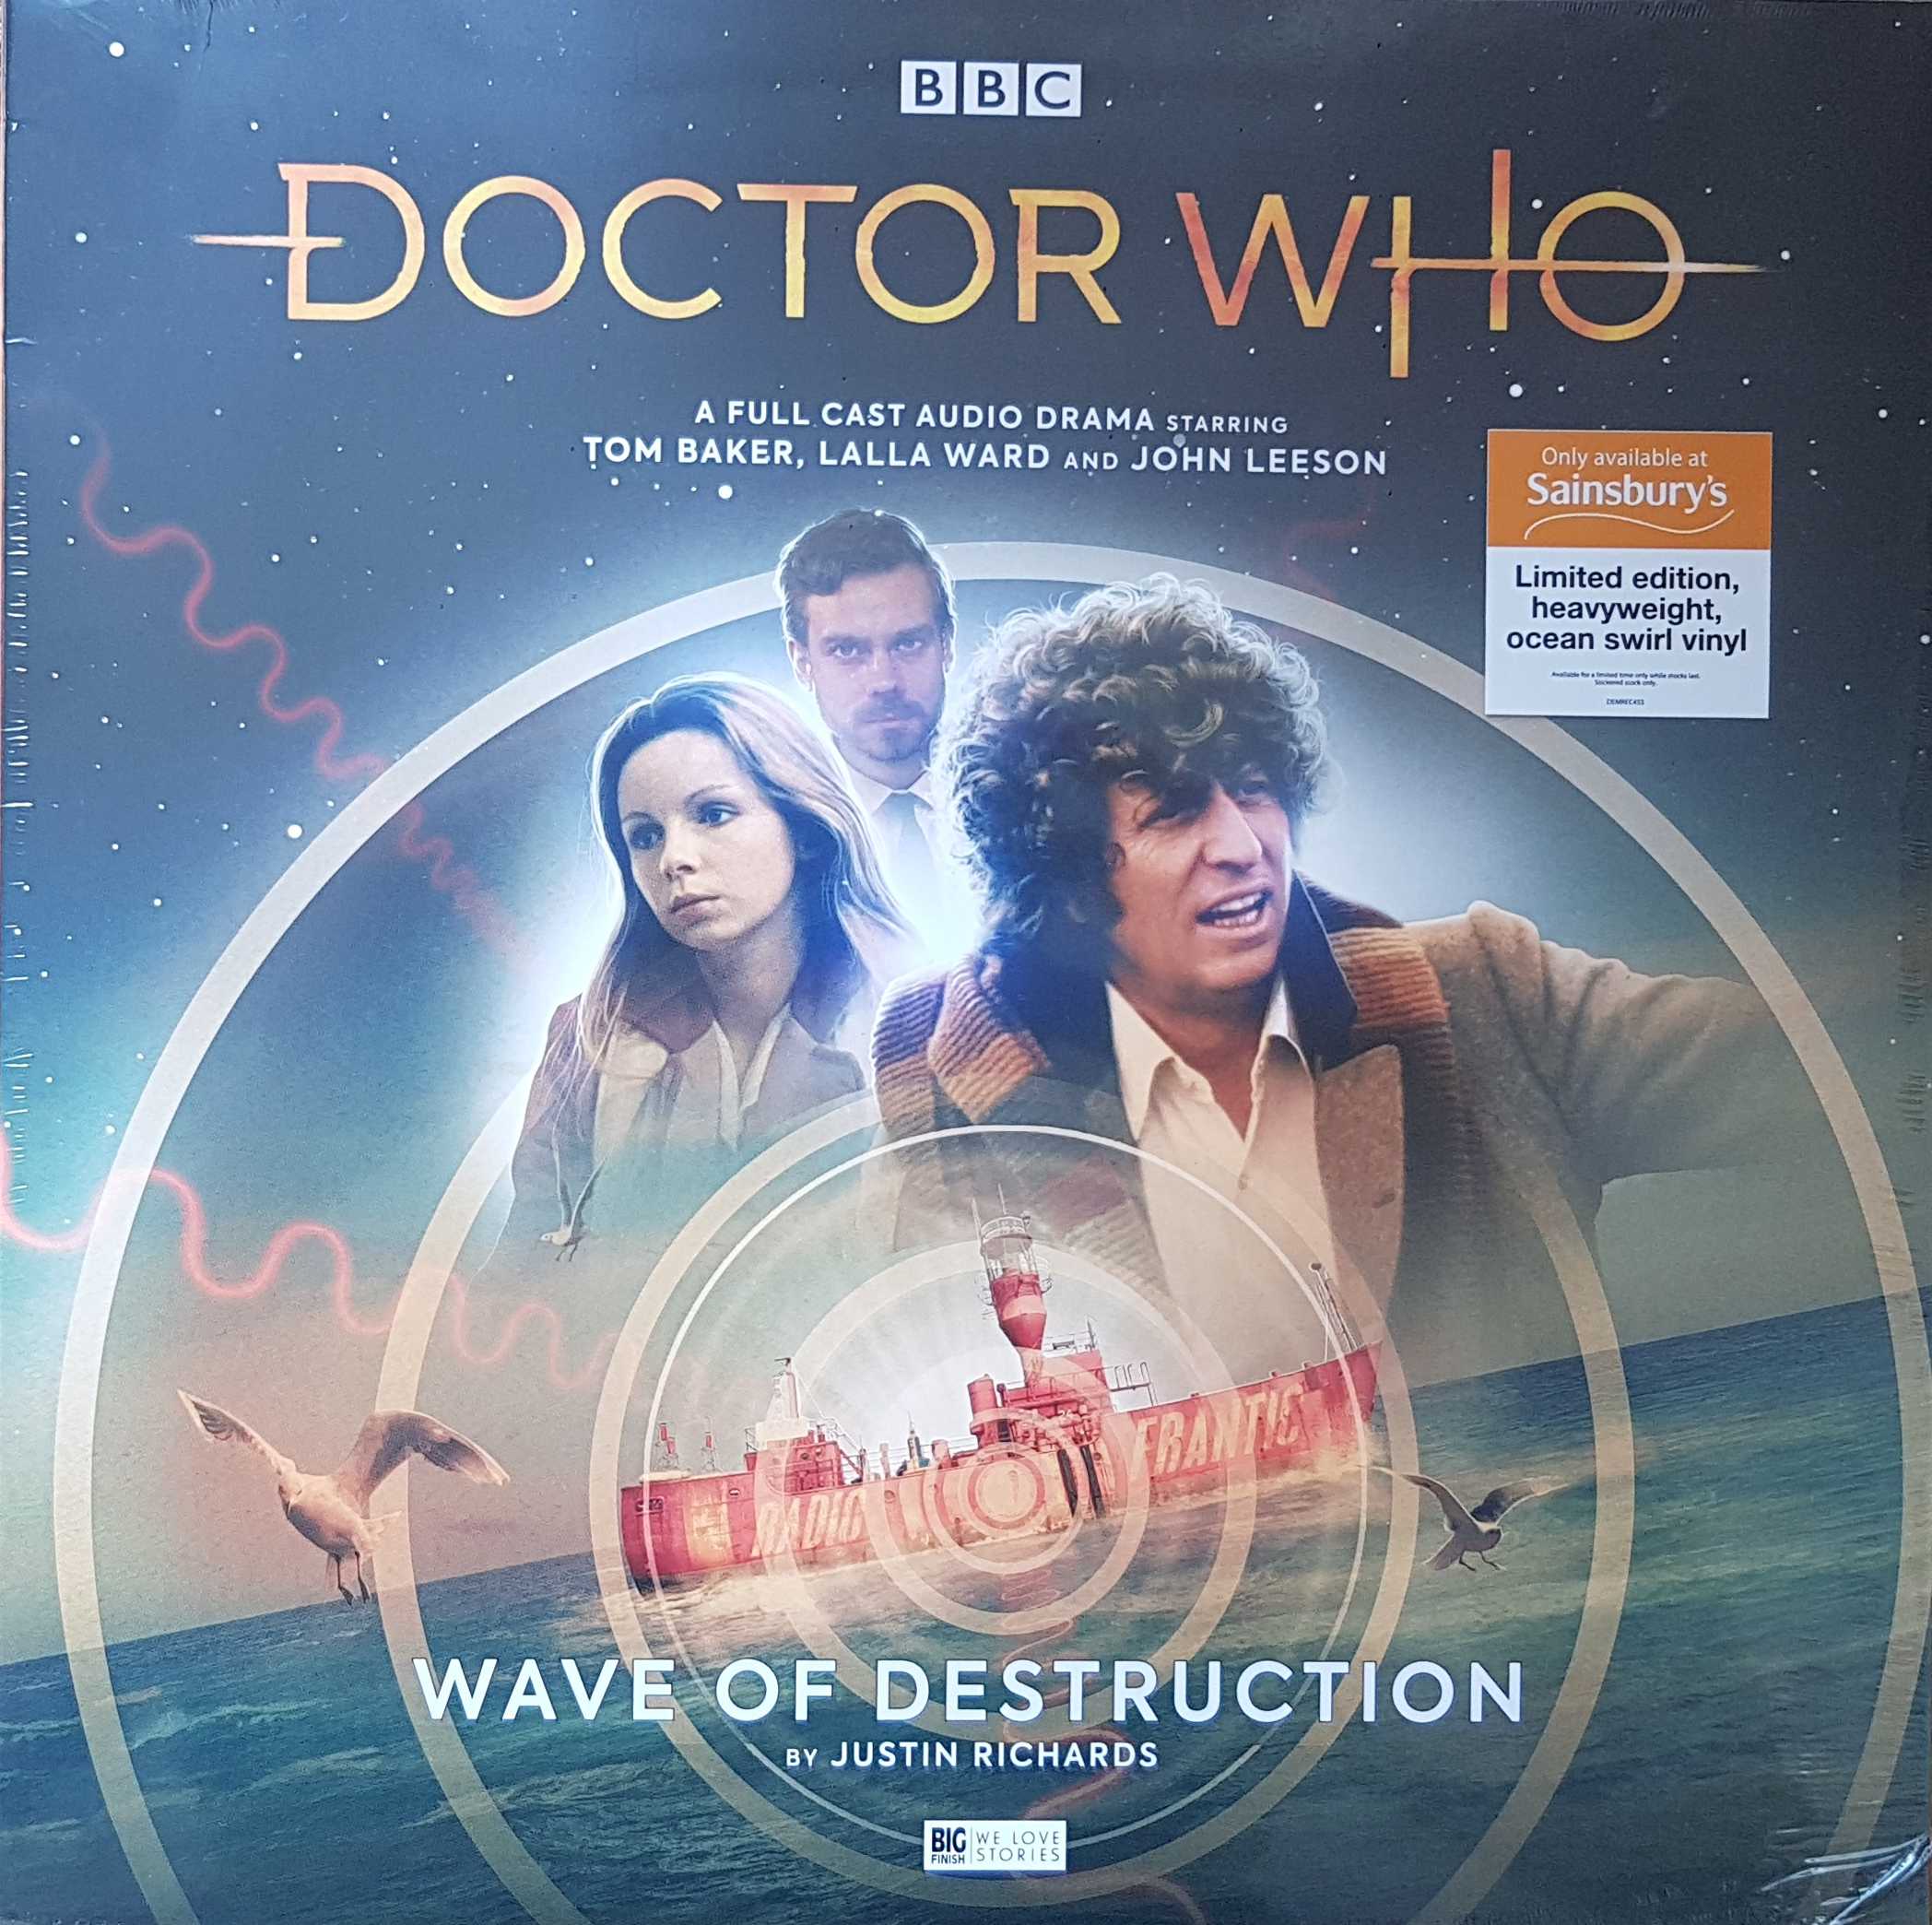 Picture of Doctor Who - Wave of destruction by artist Justin Roberts from the BBC albums - Records and Tapes library